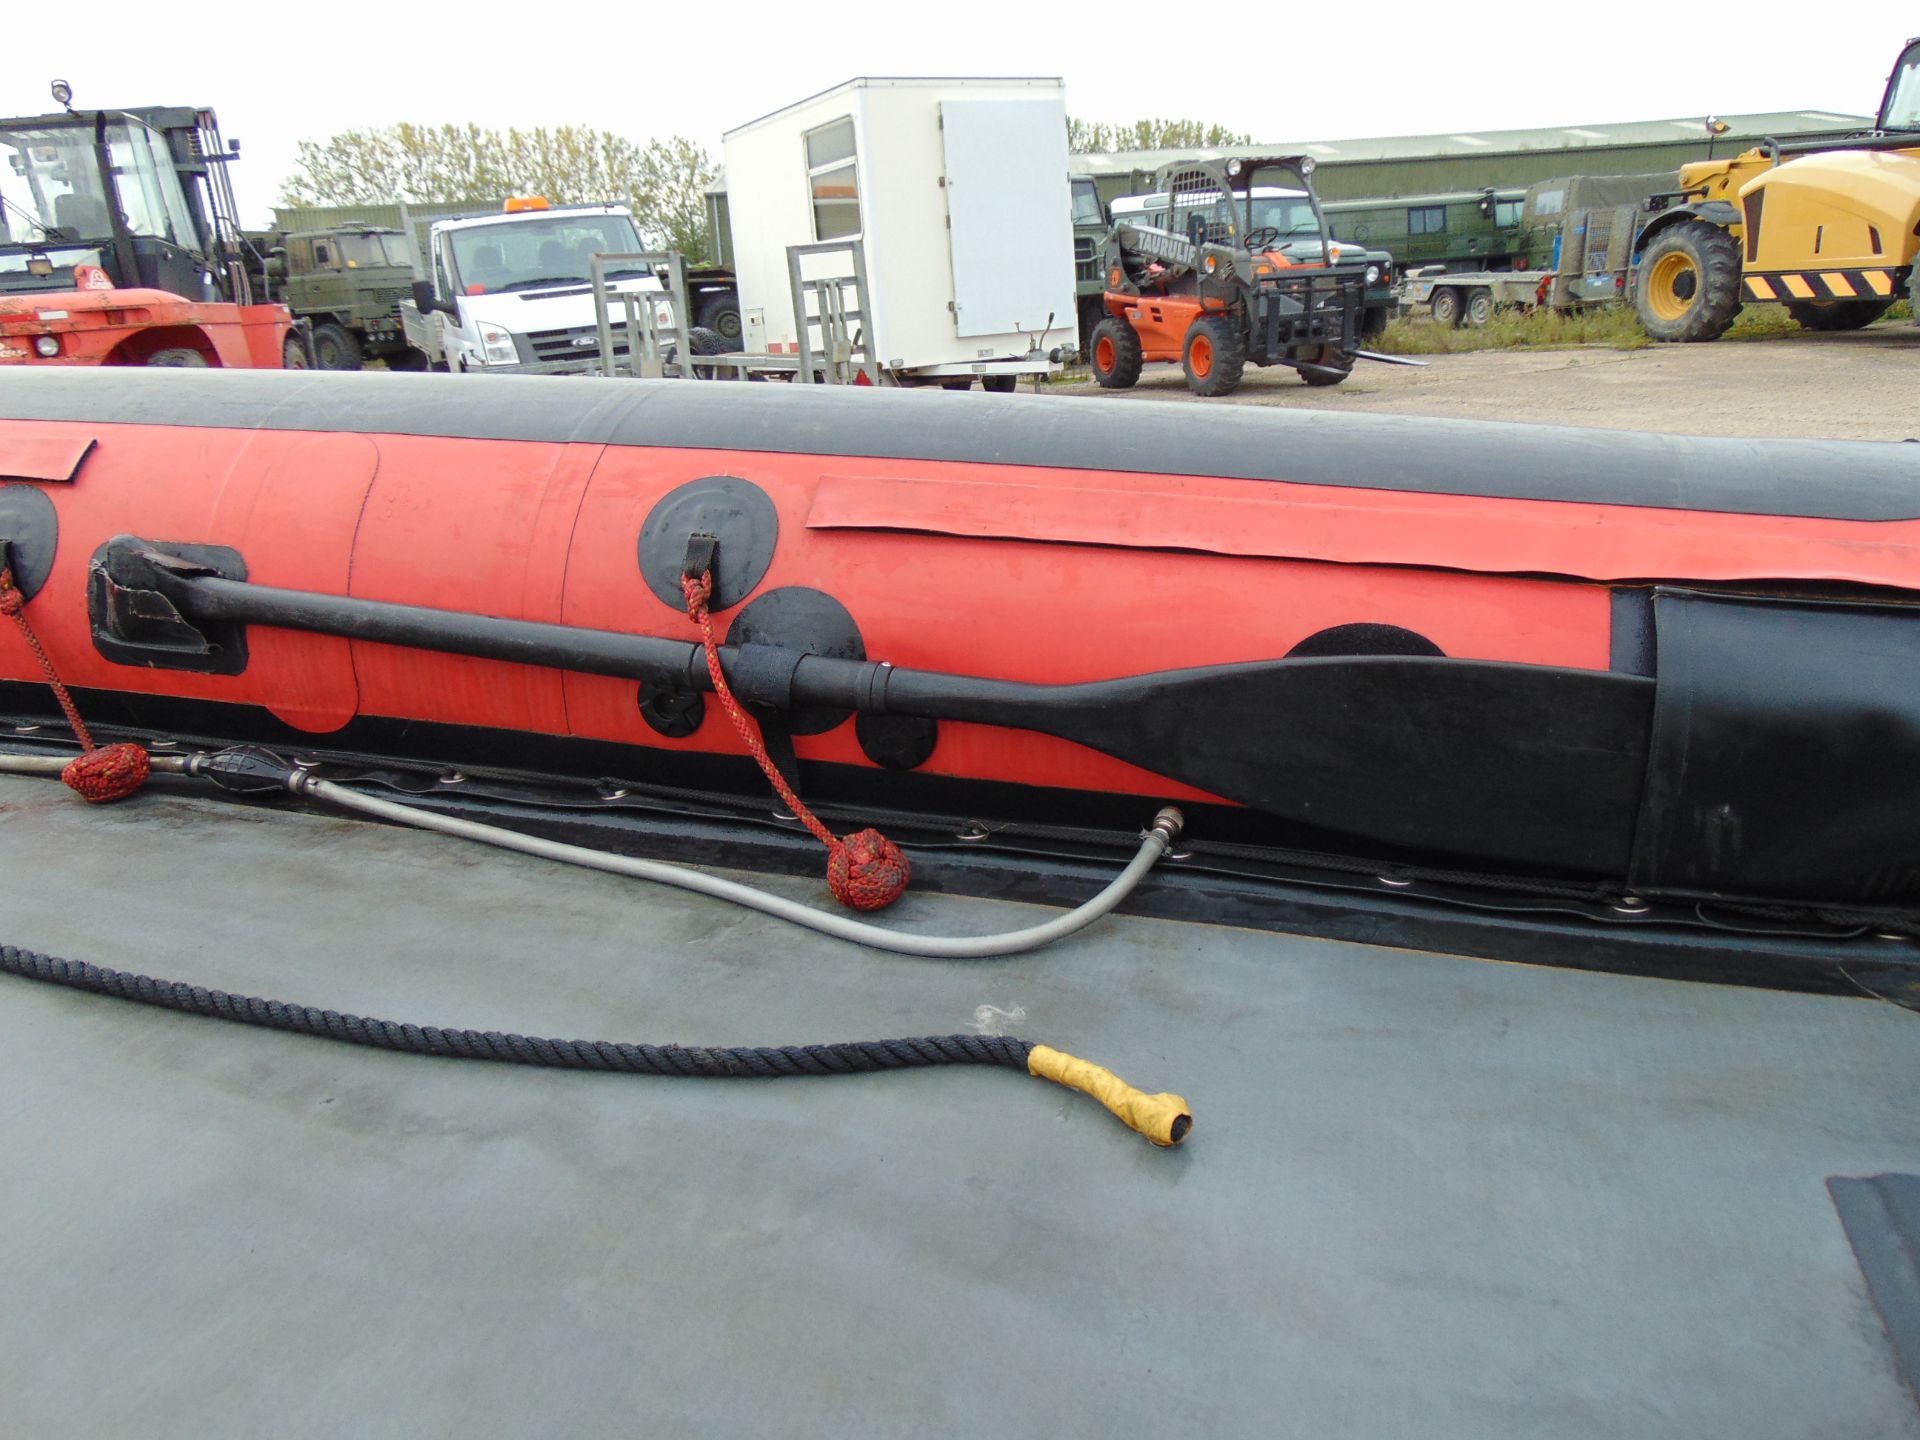 Eurocraft 440 Inflatable Rib C/W Mariner Outboard Motor and Transportation Trailer - Image 13 of 26